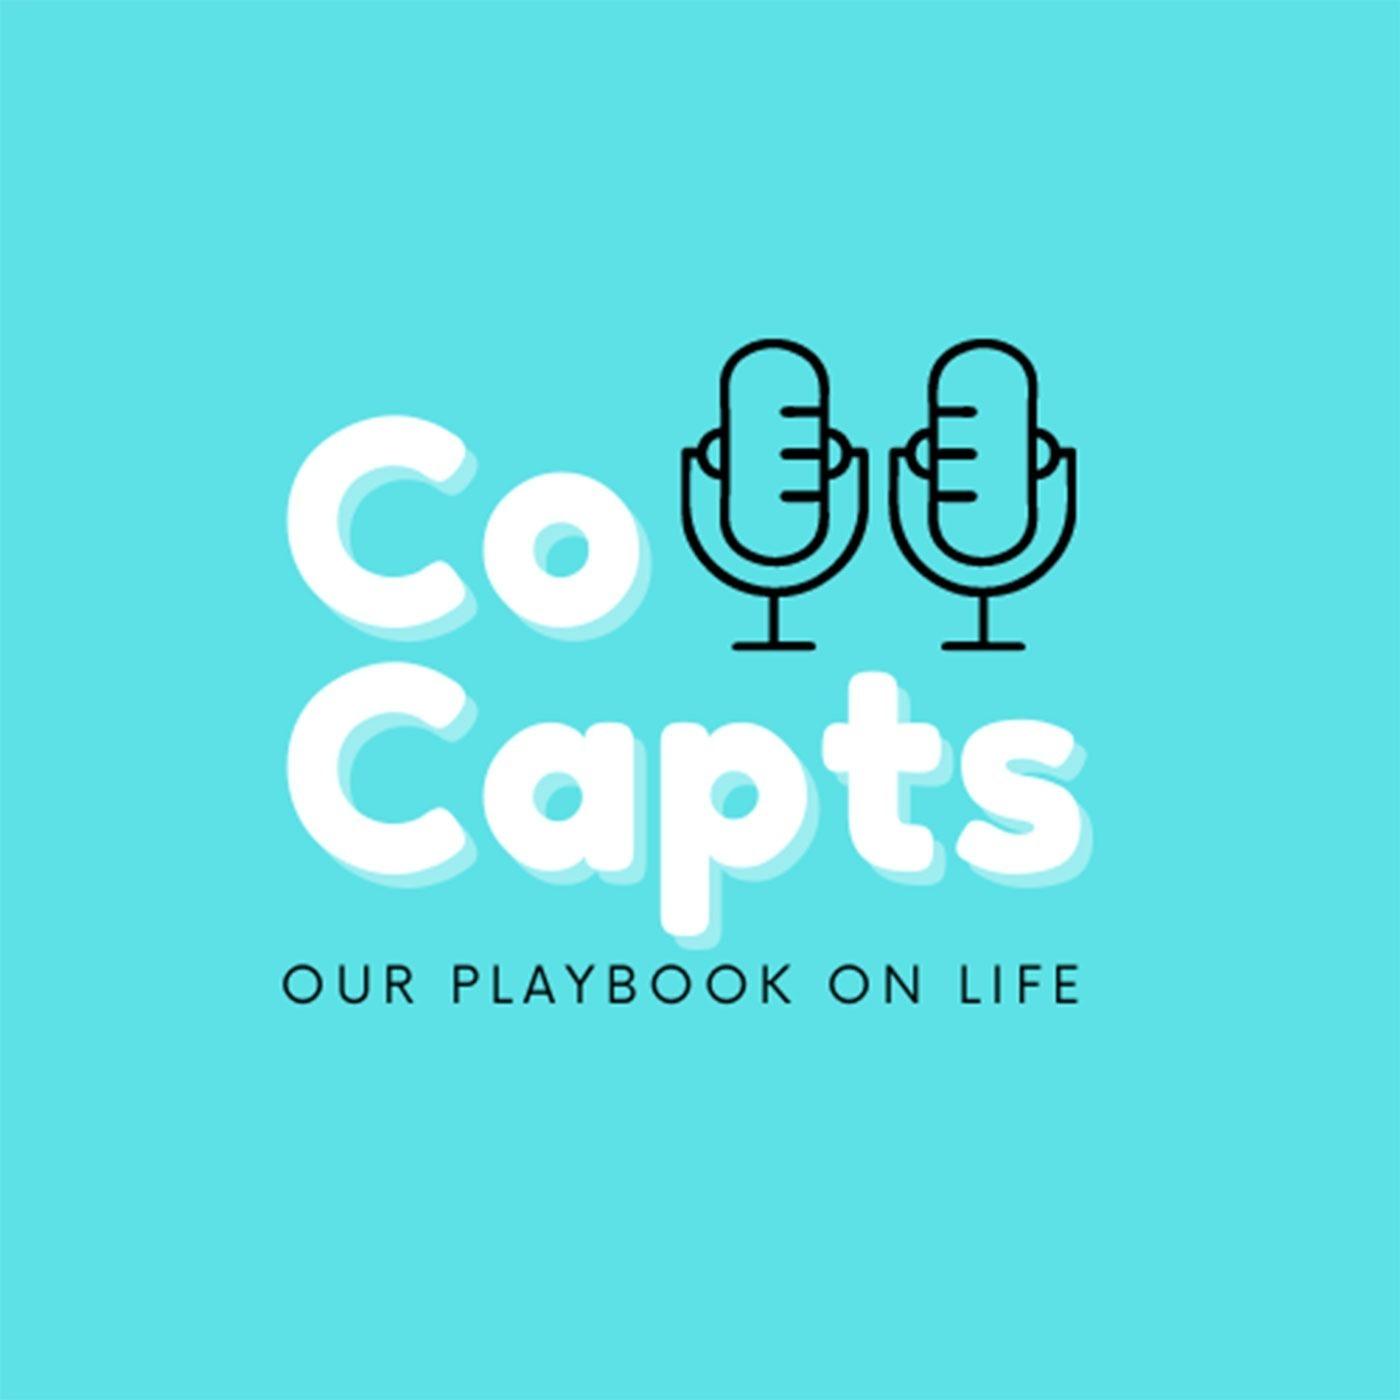 Co-Capts the Podcast